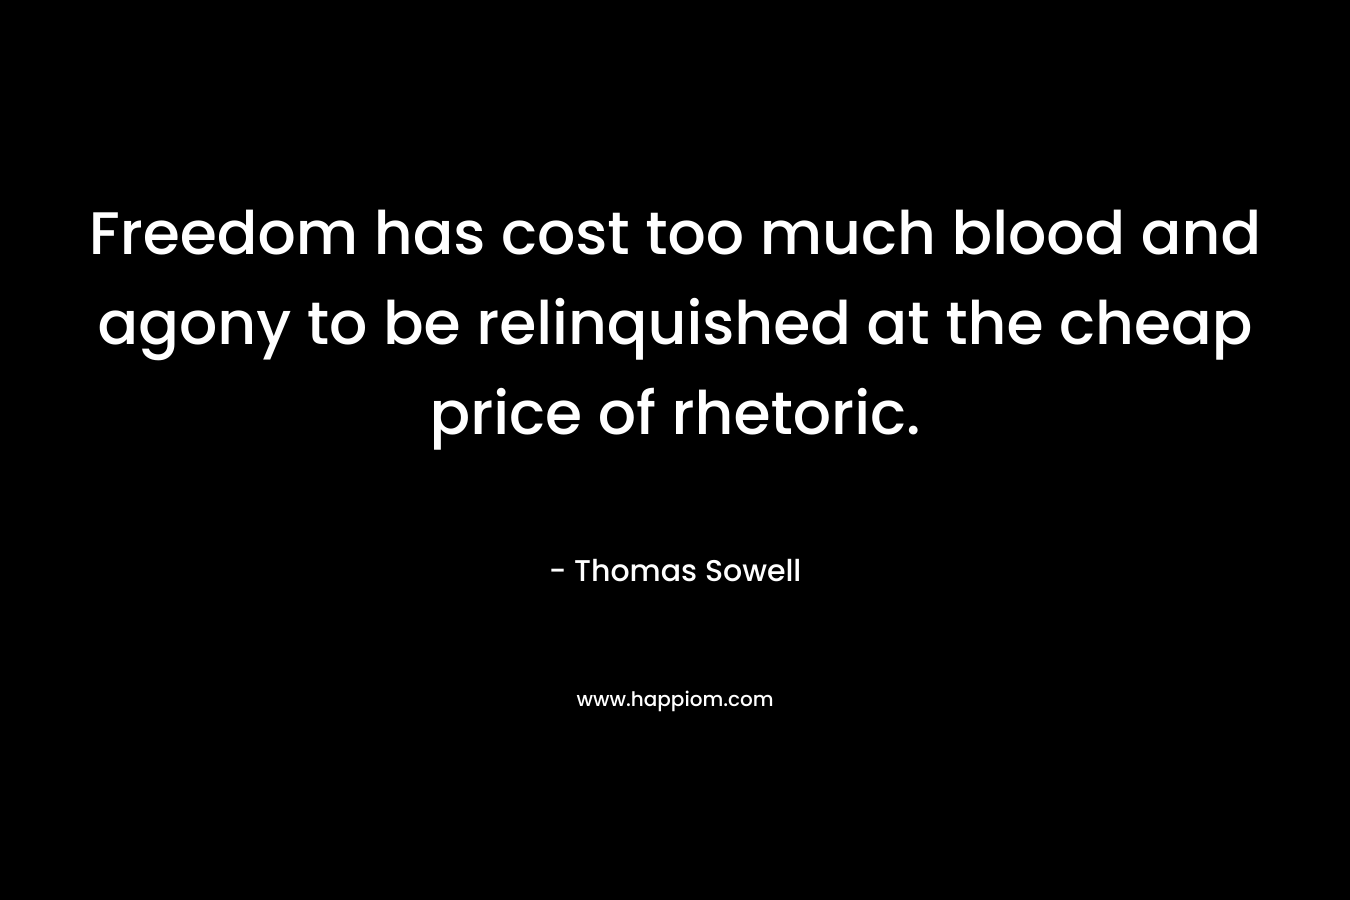 Freedom has cost too much blood and agony to be relinquished at the cheap price of rhetoric. – Thomas Sowell